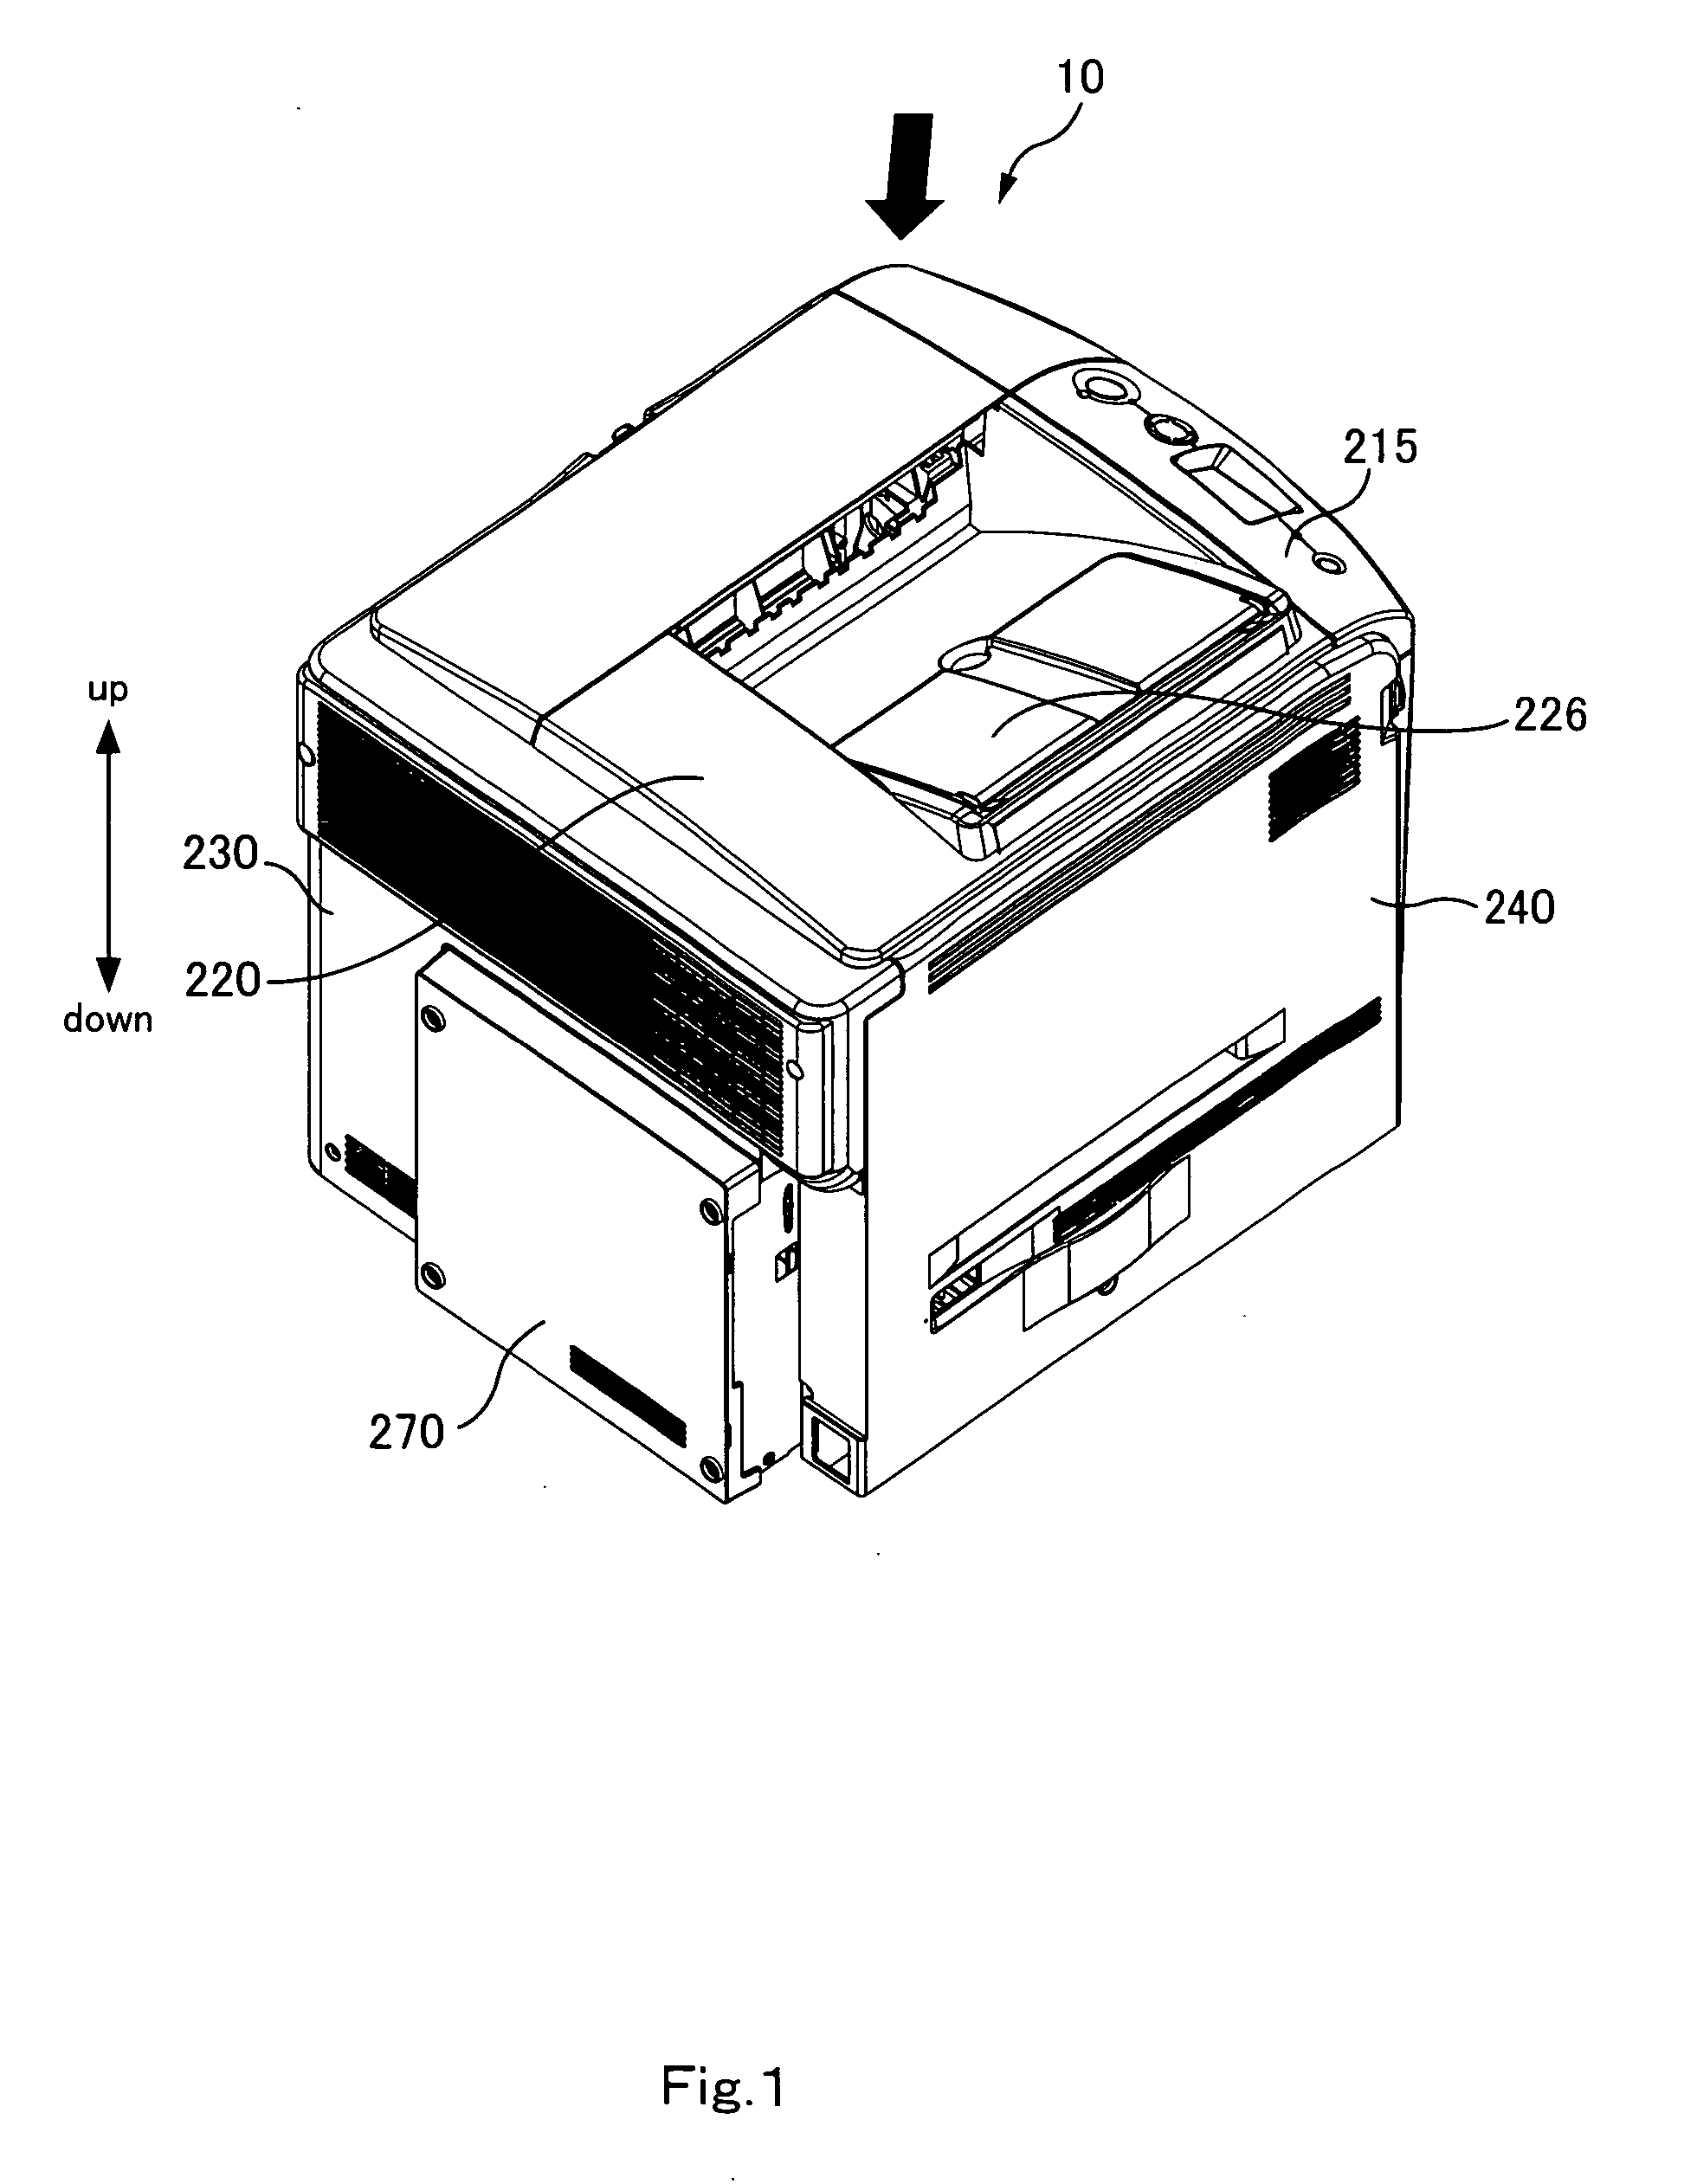 Fixing unit, image forming apparatus, and image forming system